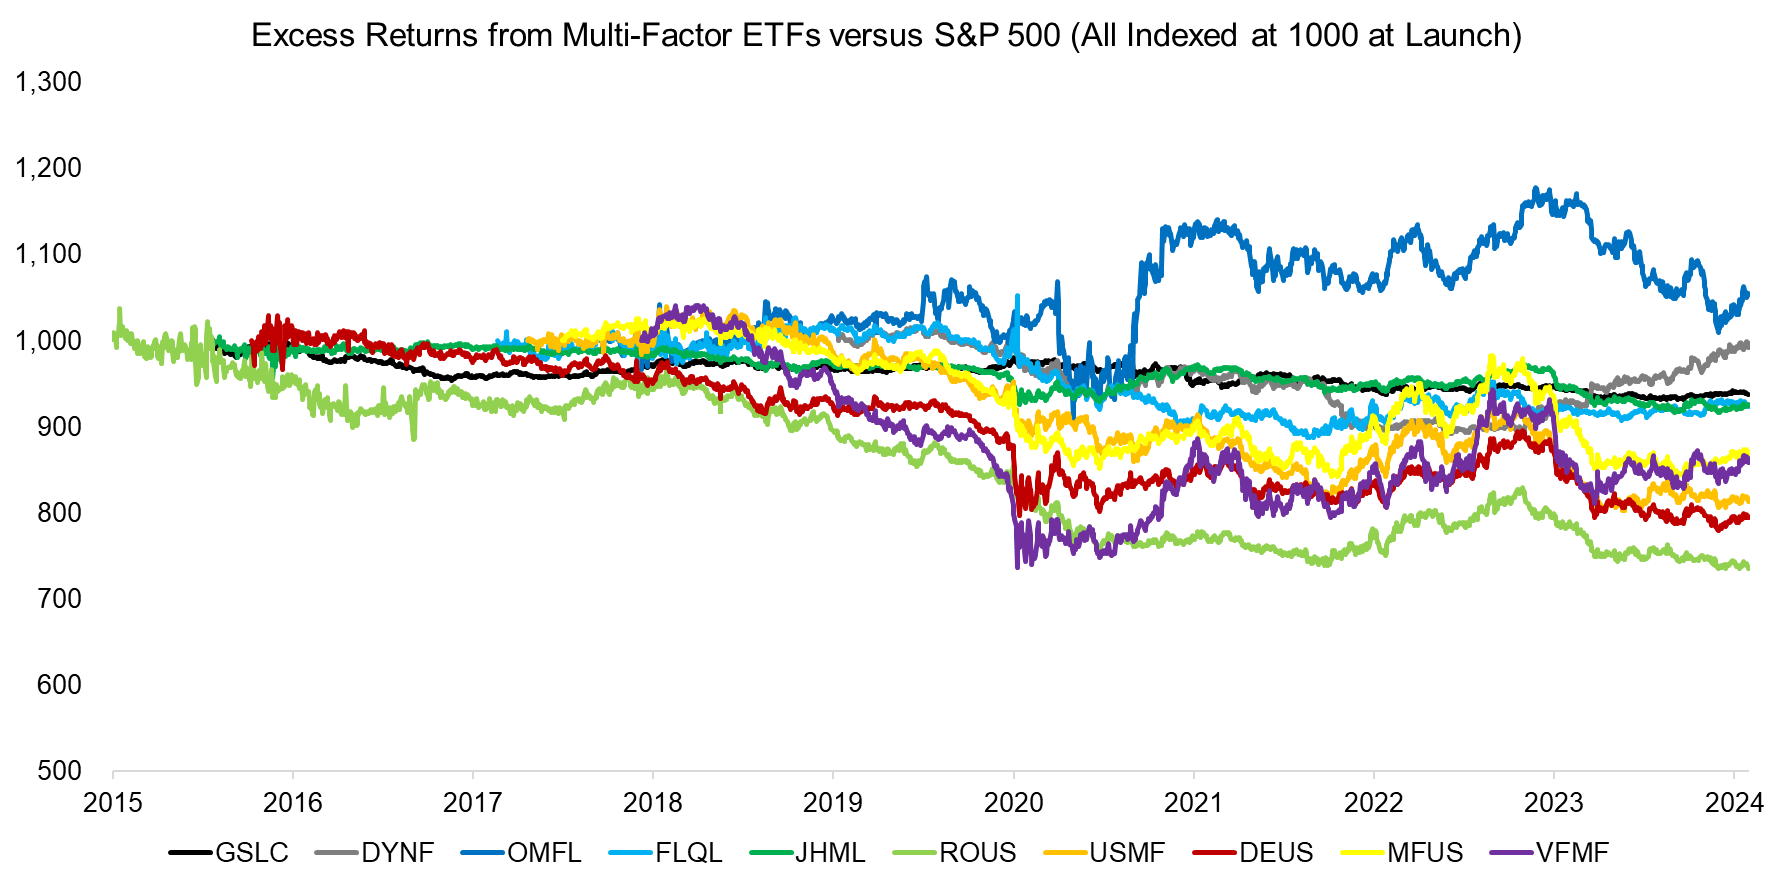 Excess Returns from Multi-Factor ETFs versus S&P 500 (All Indexed at 1000 at Laun